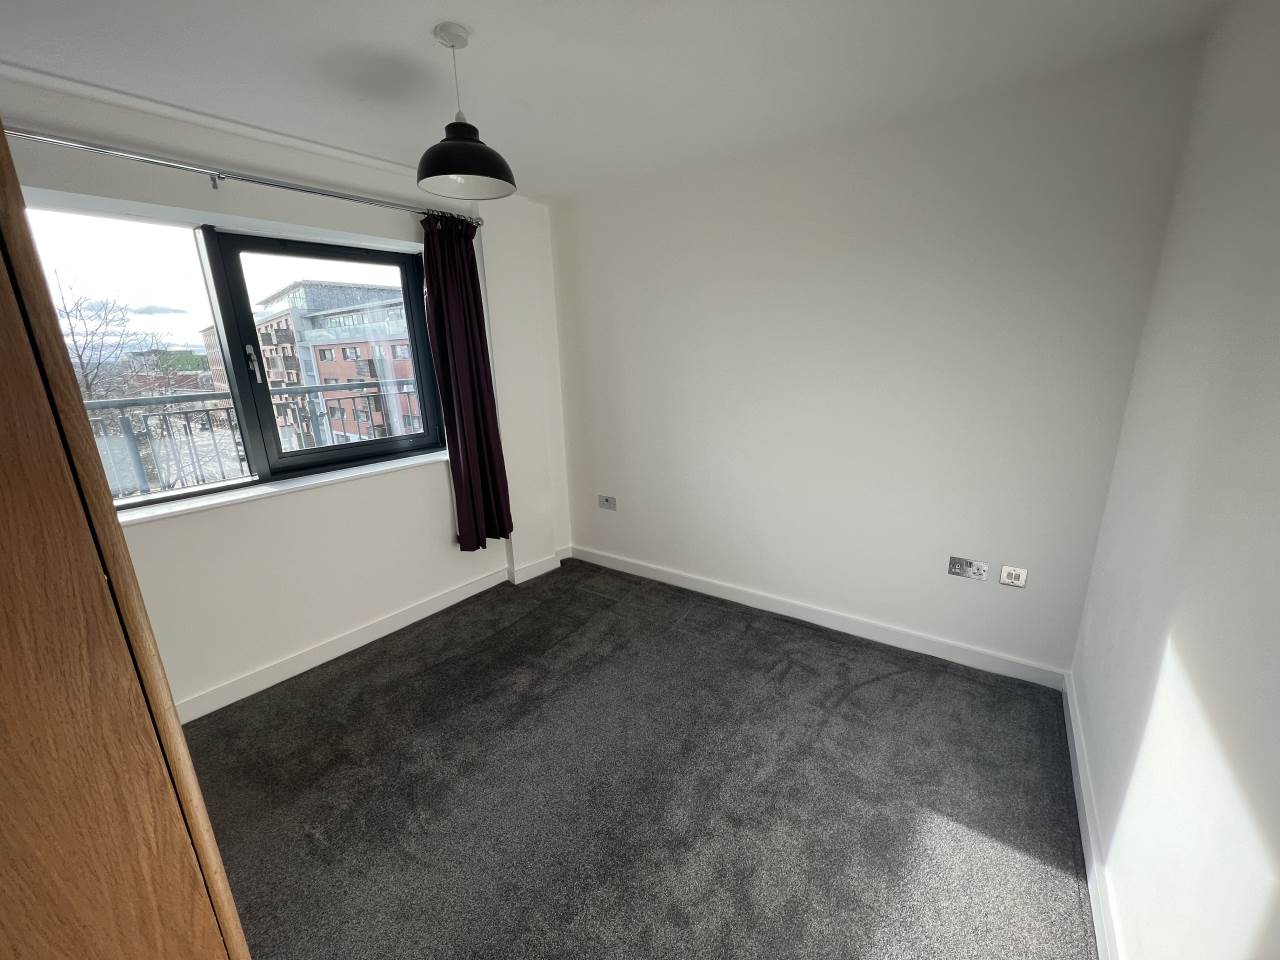 2 bed flat to rent in Granville Street (with one parking space) 6